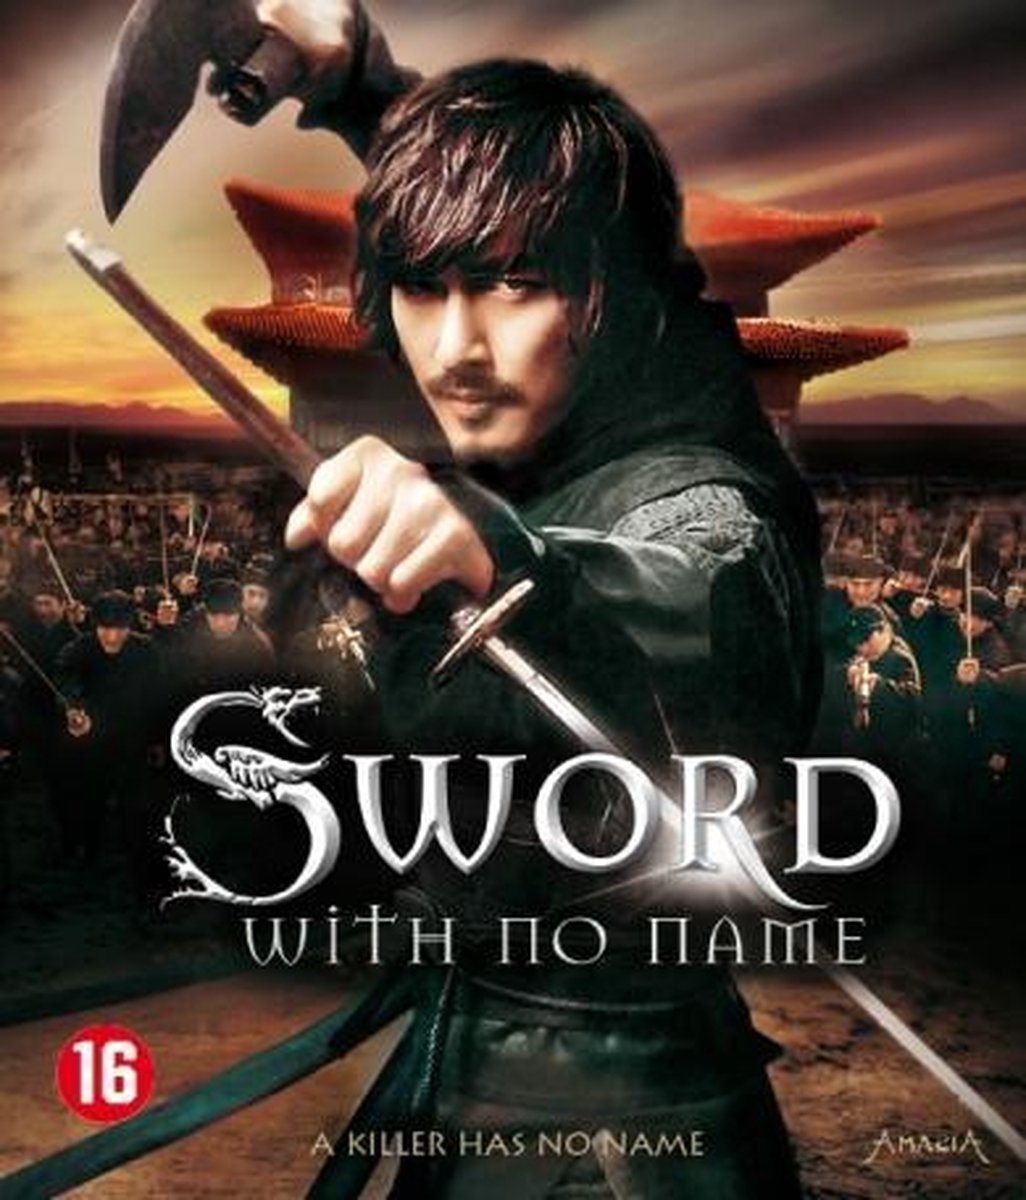 Sword With No Name (Blu-ray)